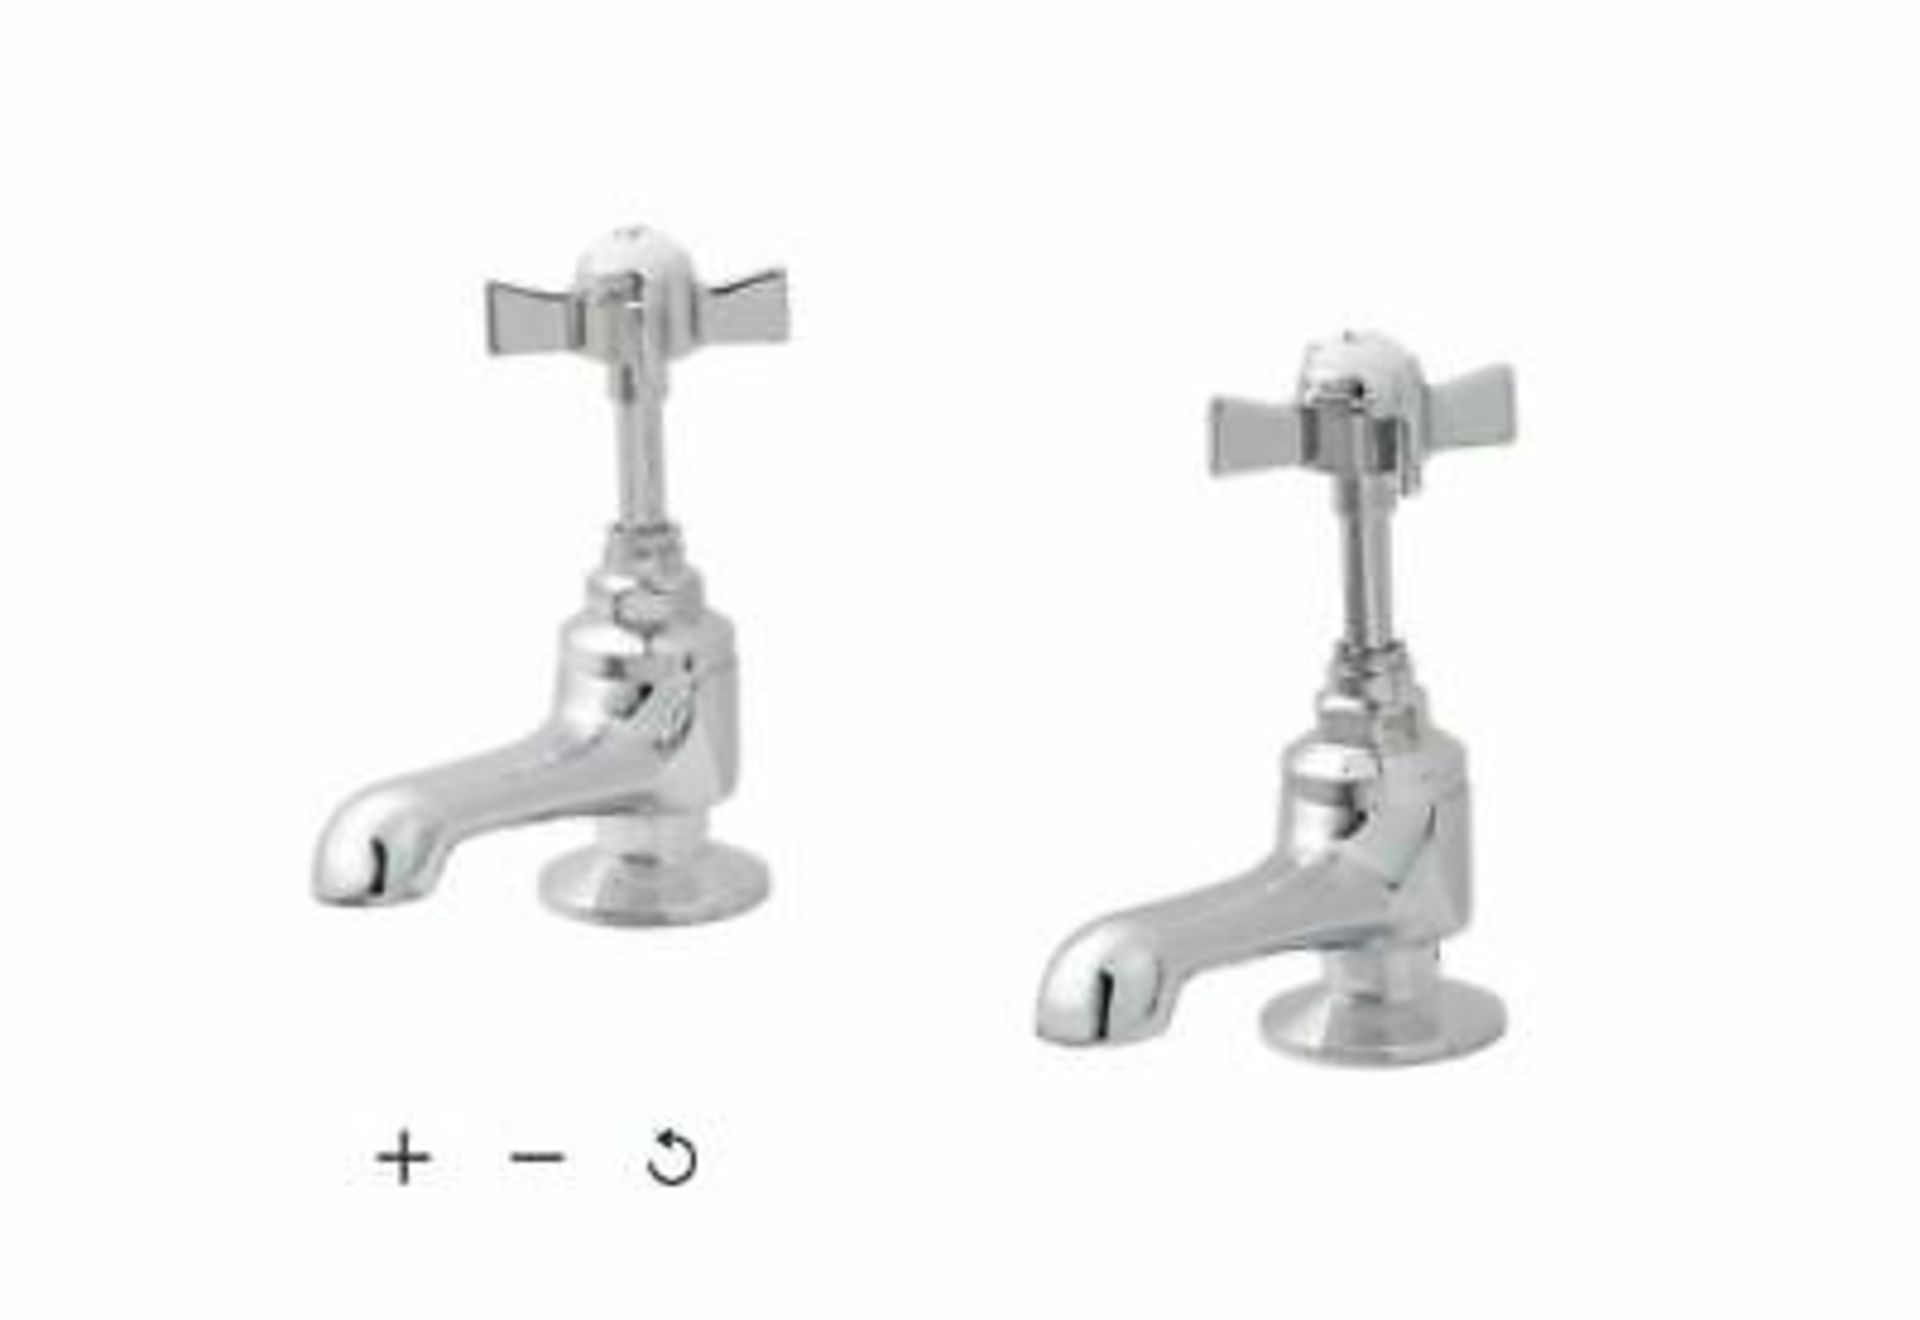 New & Boxed Traditional Pair Of Hot And Cold Basin Sink Taps Chrome Vintage Faucets. Tb31.Idea...